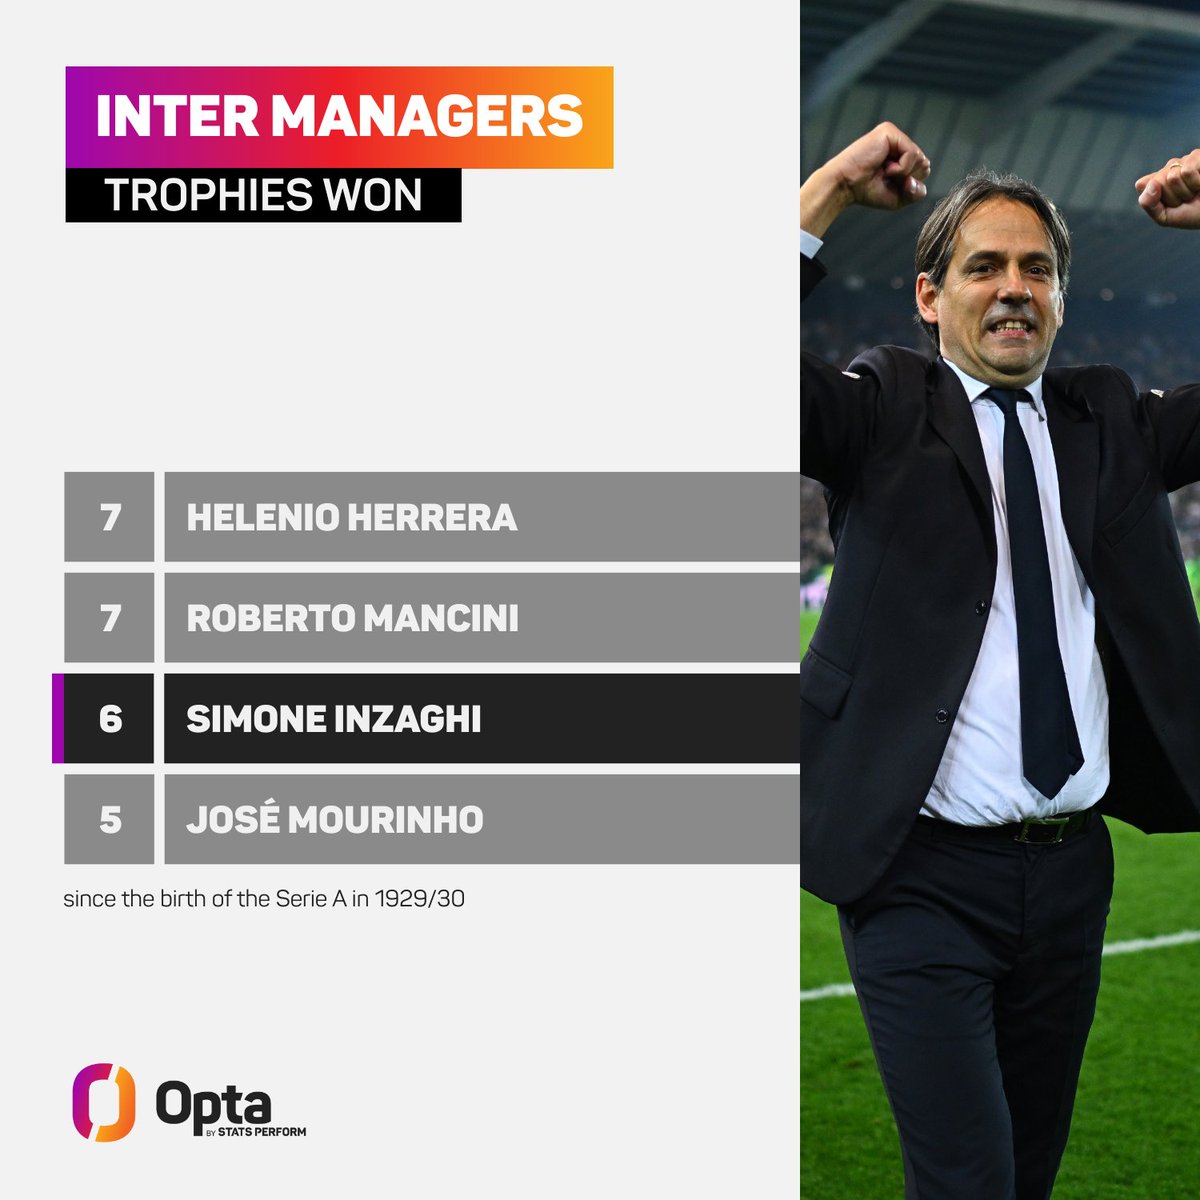 6 - Simone #Inzaghi won his 6th trophy with the Nerazzurri, becoming the 3rd #Inter coach with the most trophies won since the foundation of the #SerieA (1929-30), after Helenio Herrera and Roberto Mancini (both 7). Collector. #DerbyMilano